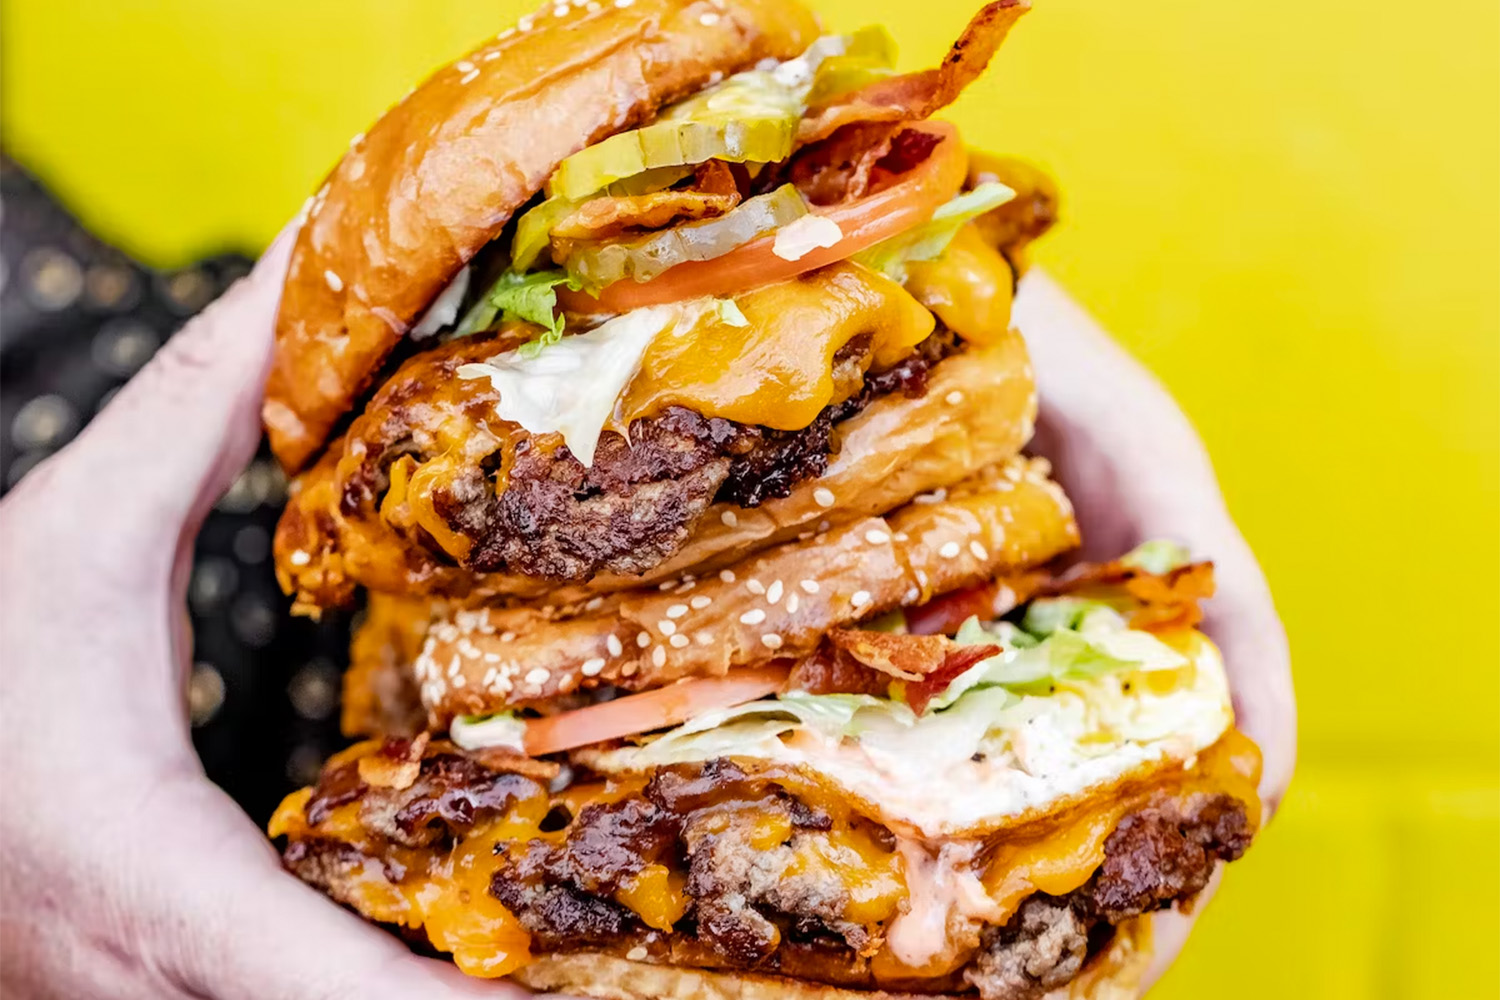 At Rooftop Brewing, Smash That Burger Makes One of Seattle's Best Burgers